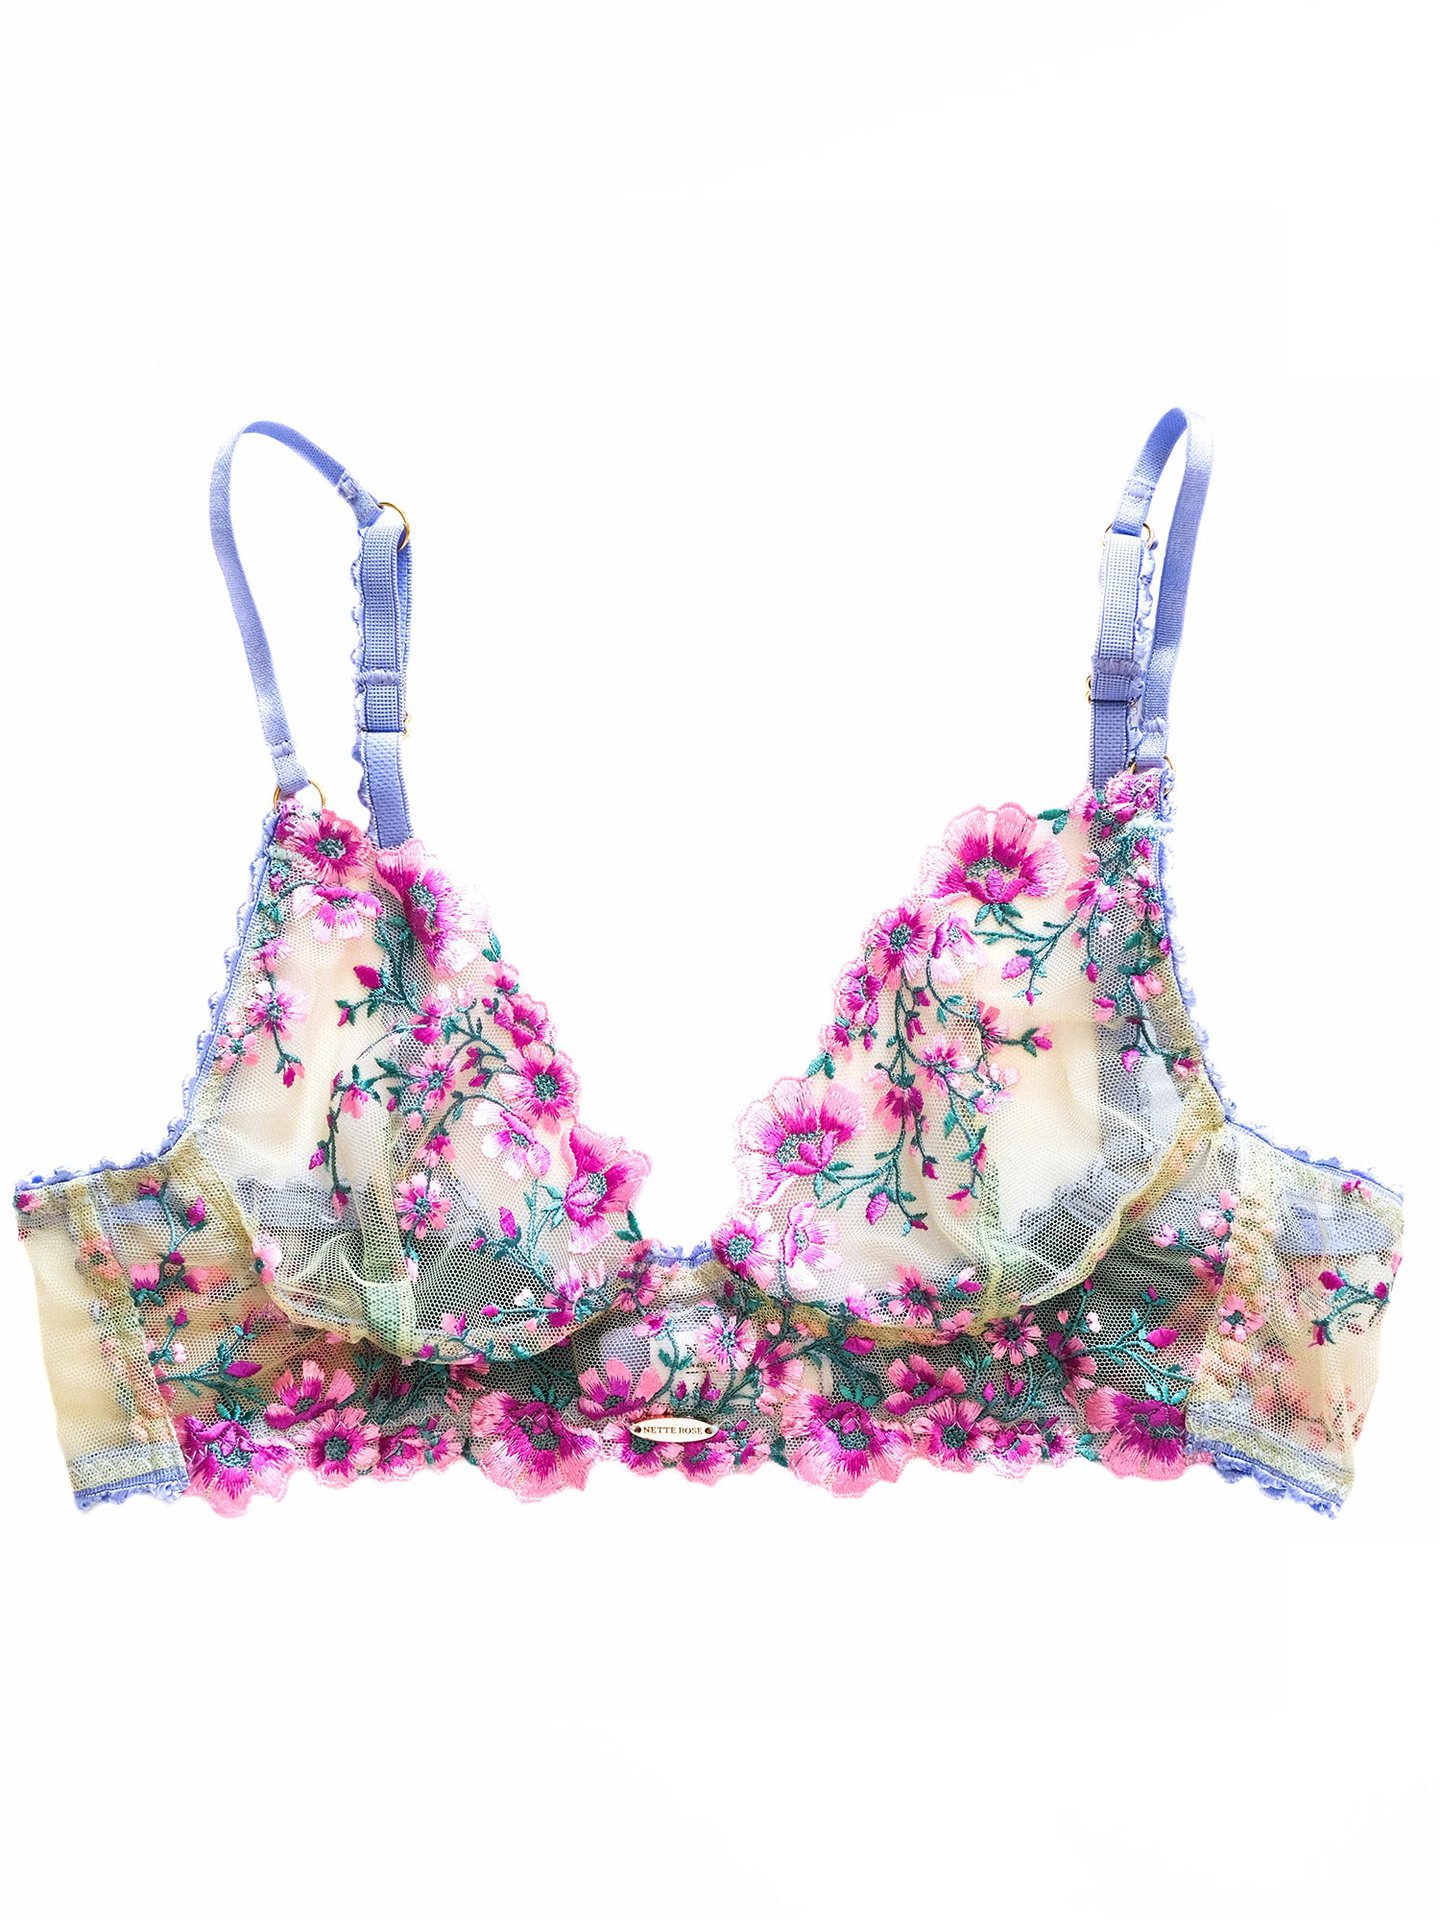 Comcompatible Witht Rose Bra, Floral Secrets Comcompatible Witht Rose Bra,  Front Closure Lace Rose Bra Compatible With Women